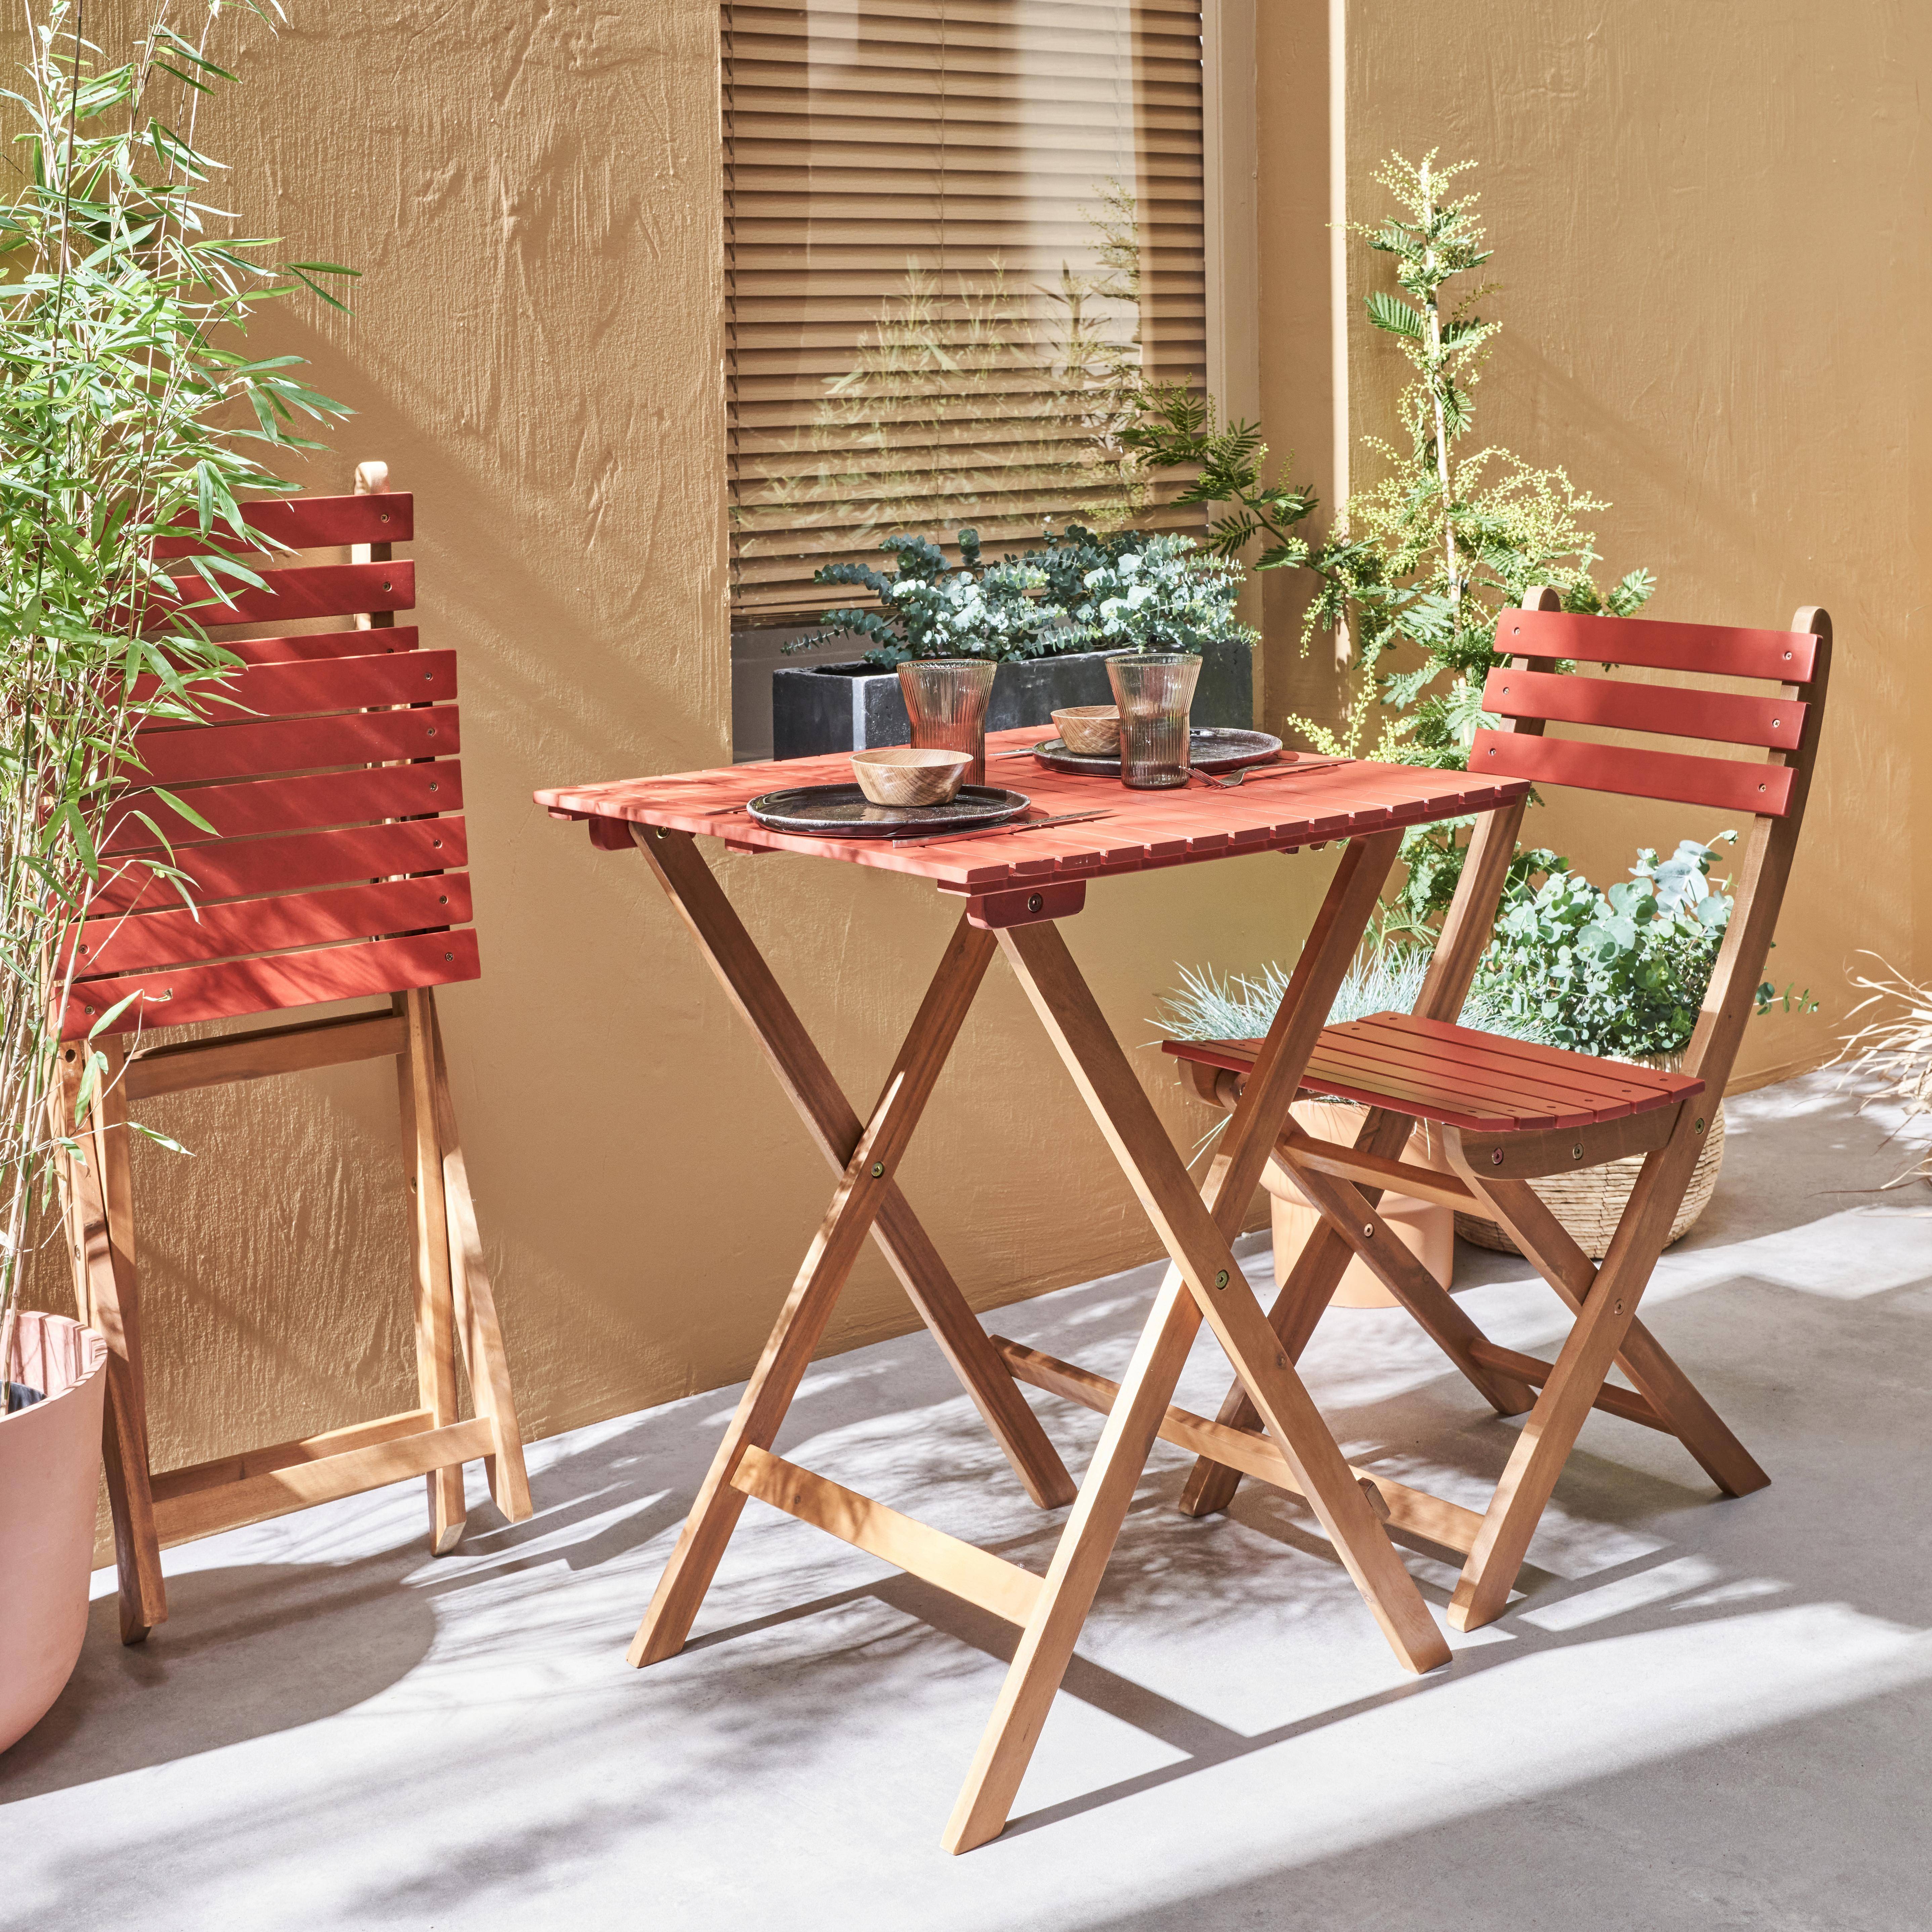 2-seater foldable wooden bistro garden table with chairs, 60x60cm - Barcelona - Terracotta,sweeek,Photo2